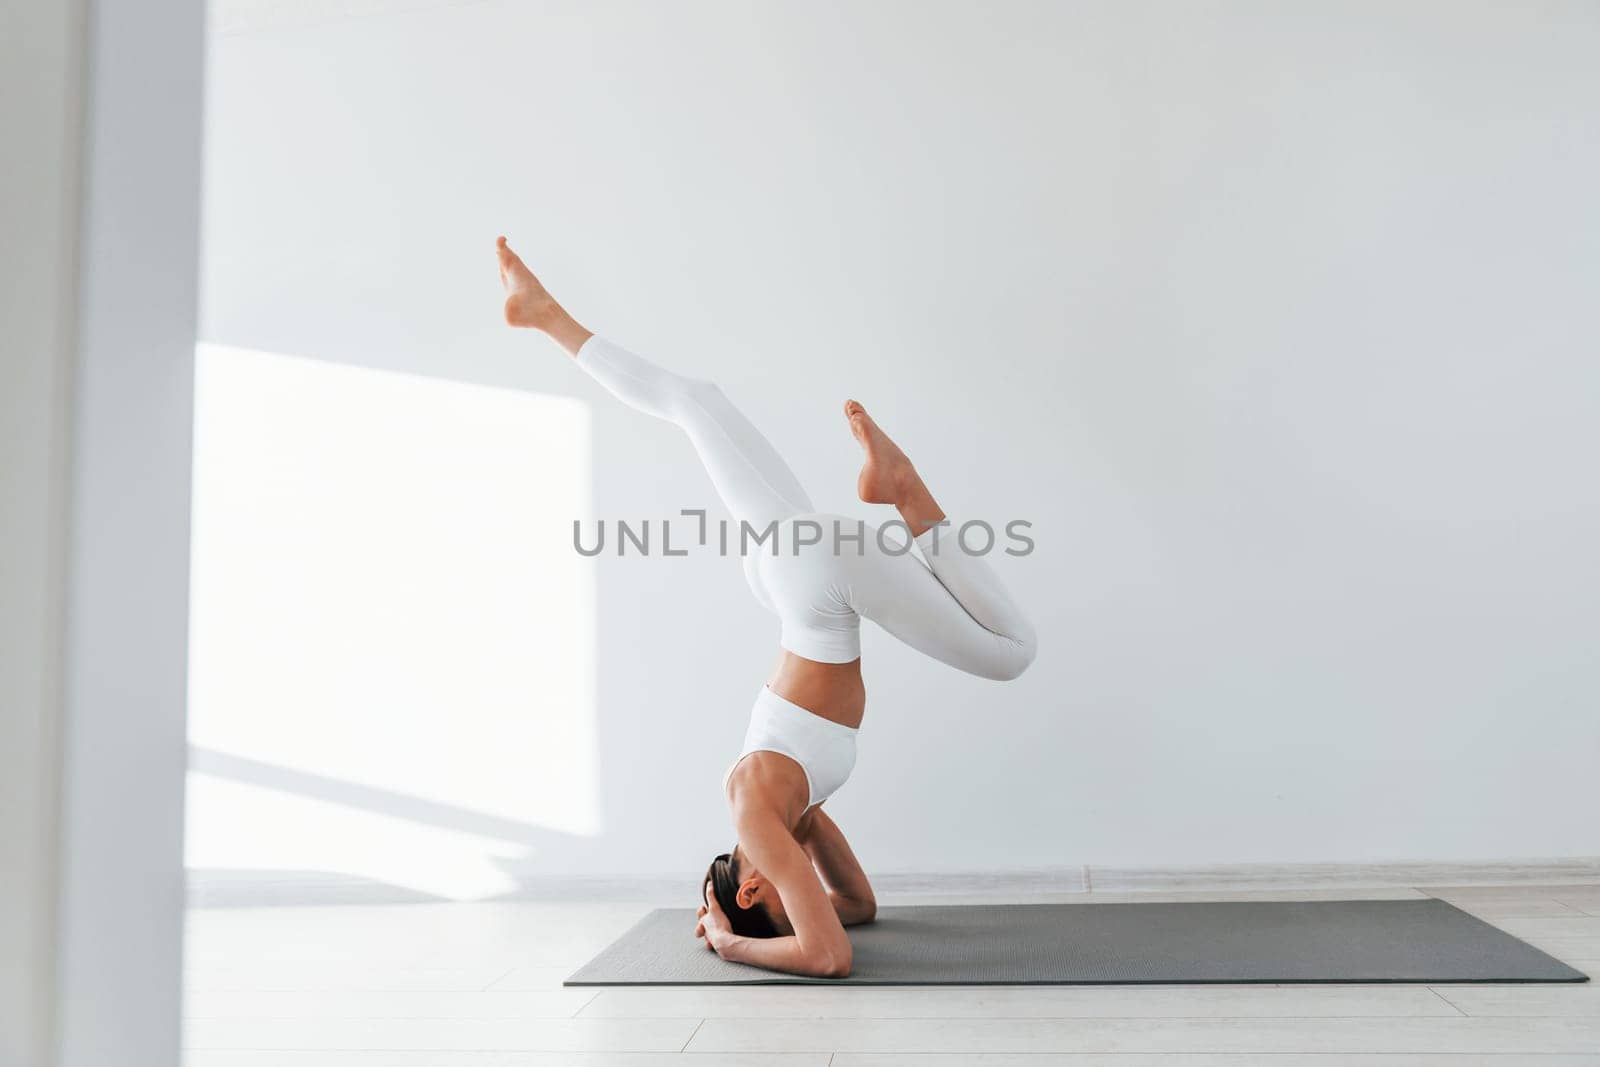 Doing exercises. Young caucasian woman with slim body shape is indoors at daytime.